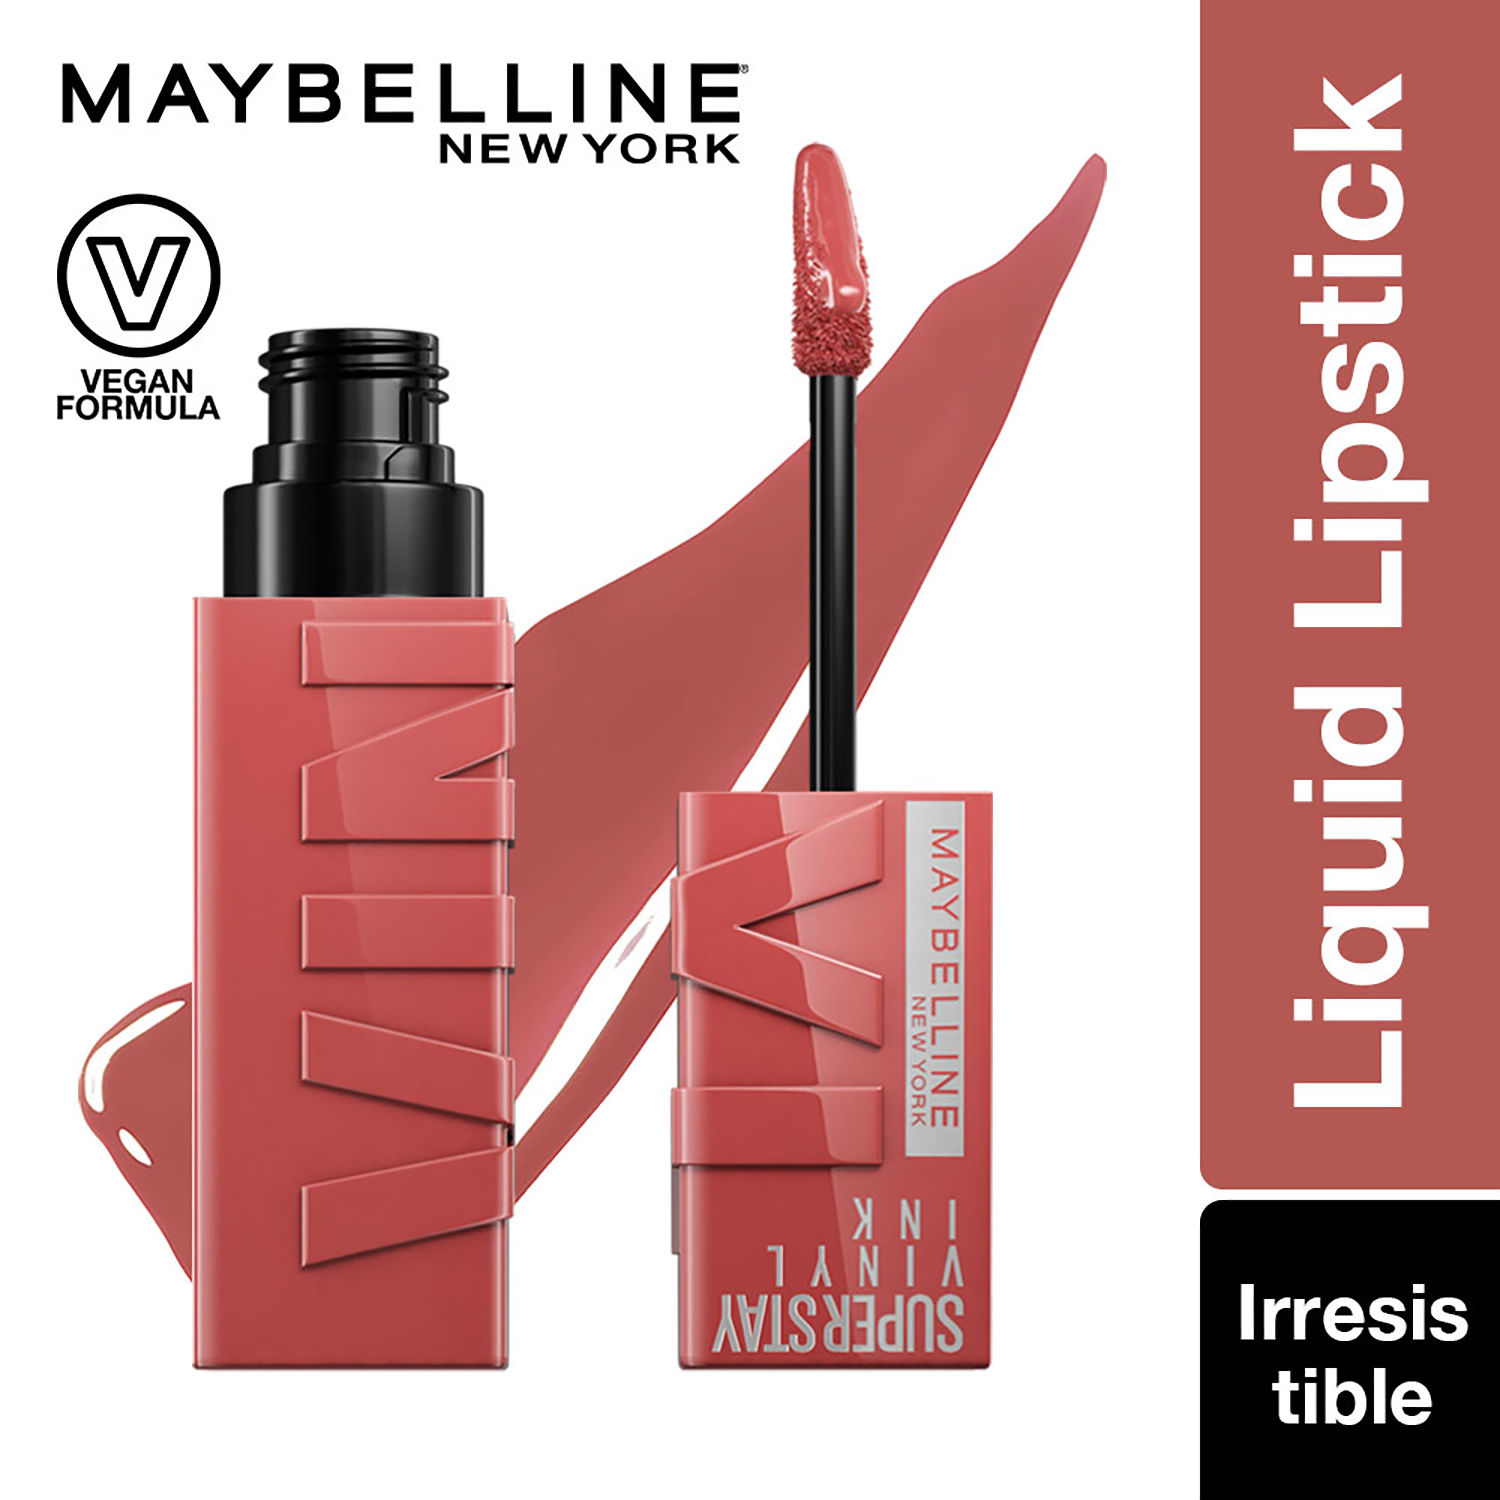 Buy Maybelline Superstay Vinyl Ink Liquid Lipstick, Irresistible, 4.2ml | High Shine That Lasts for 16 HRs - Purplle